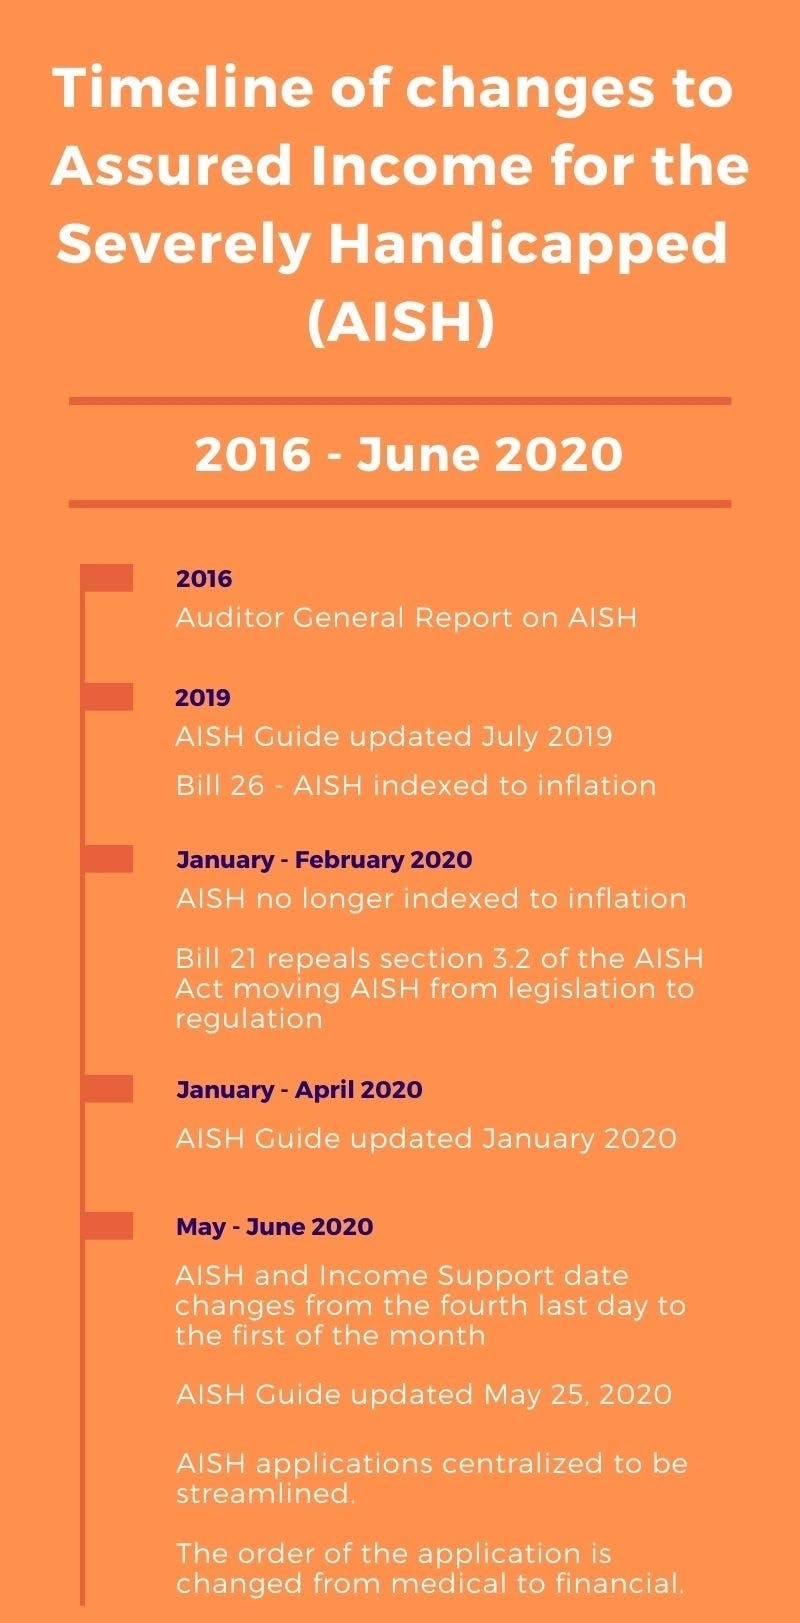 AISH timeline of changes infographic